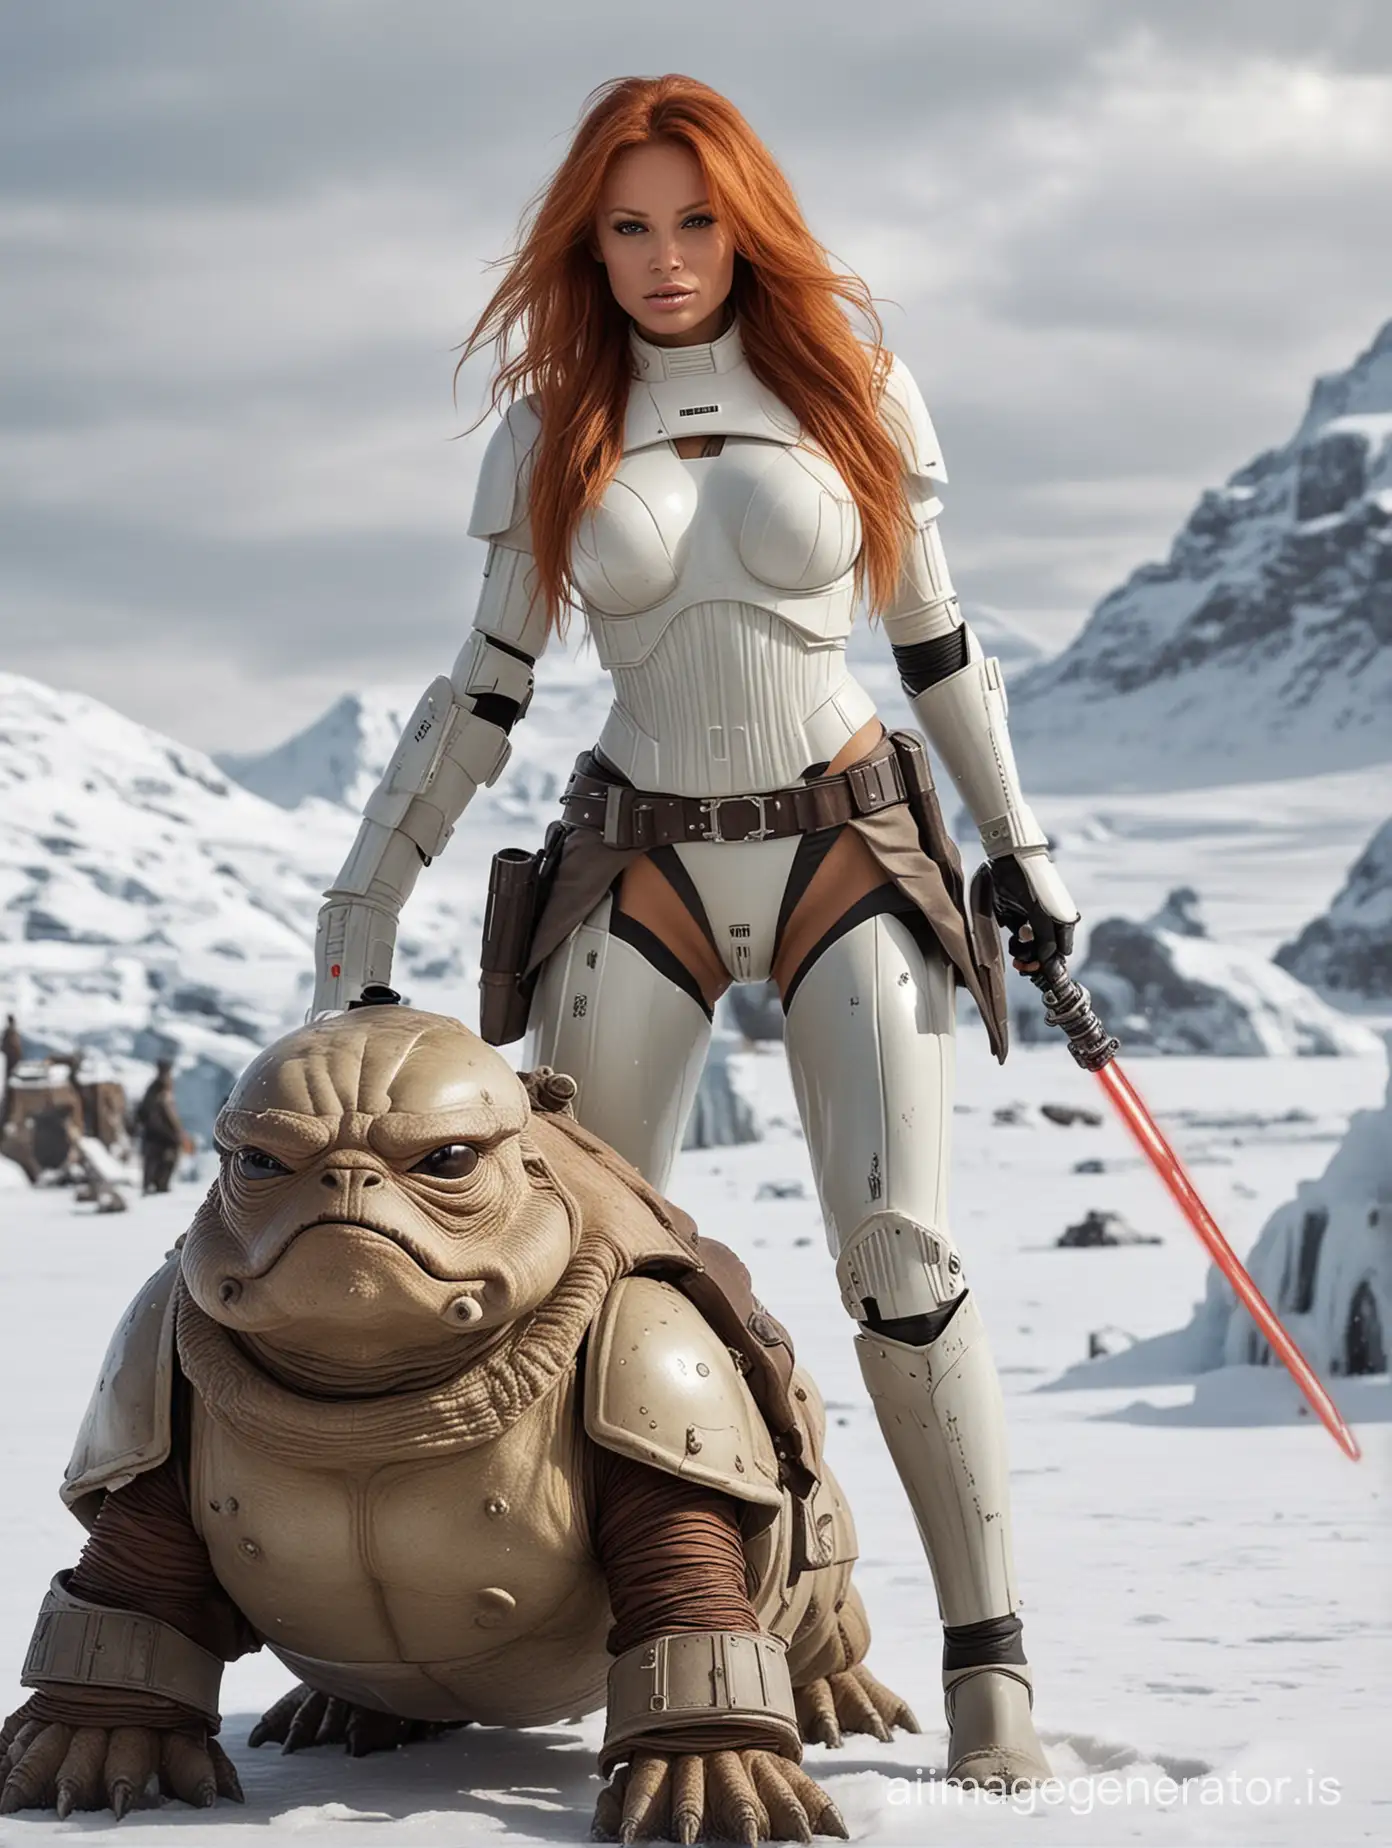 Young Pamela Anderson. full body woman riding on top of "Jabba the Hut". very long red hair. star wars stormtrooper armor and light saber and laser.  Star Wars Mandalorian, Yoda, Wookie in frozen arctic background